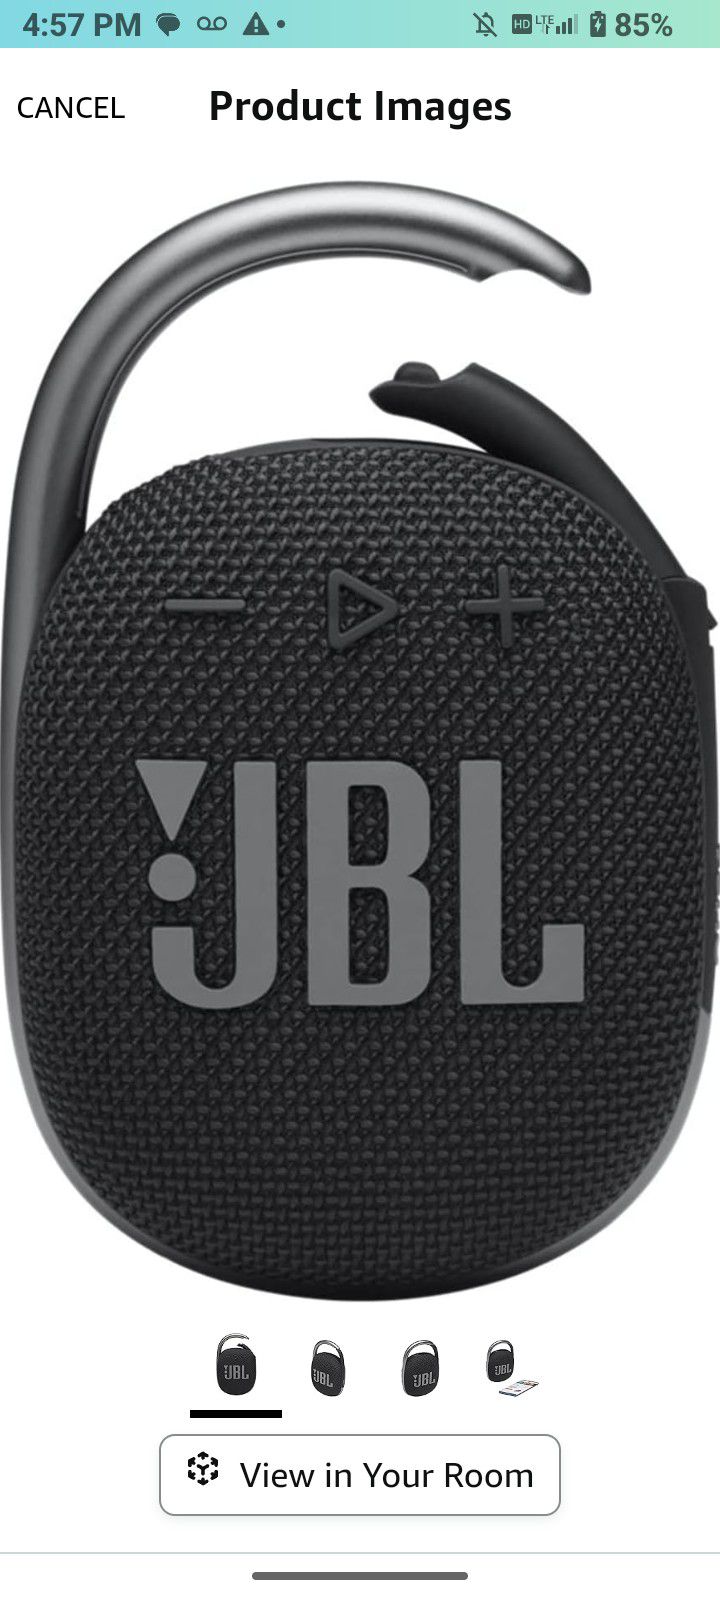 JBL CLIP 4 ***LOWEST PRICE ON OFFER UP AND MARKETPLACE*** BLACK & GRAY